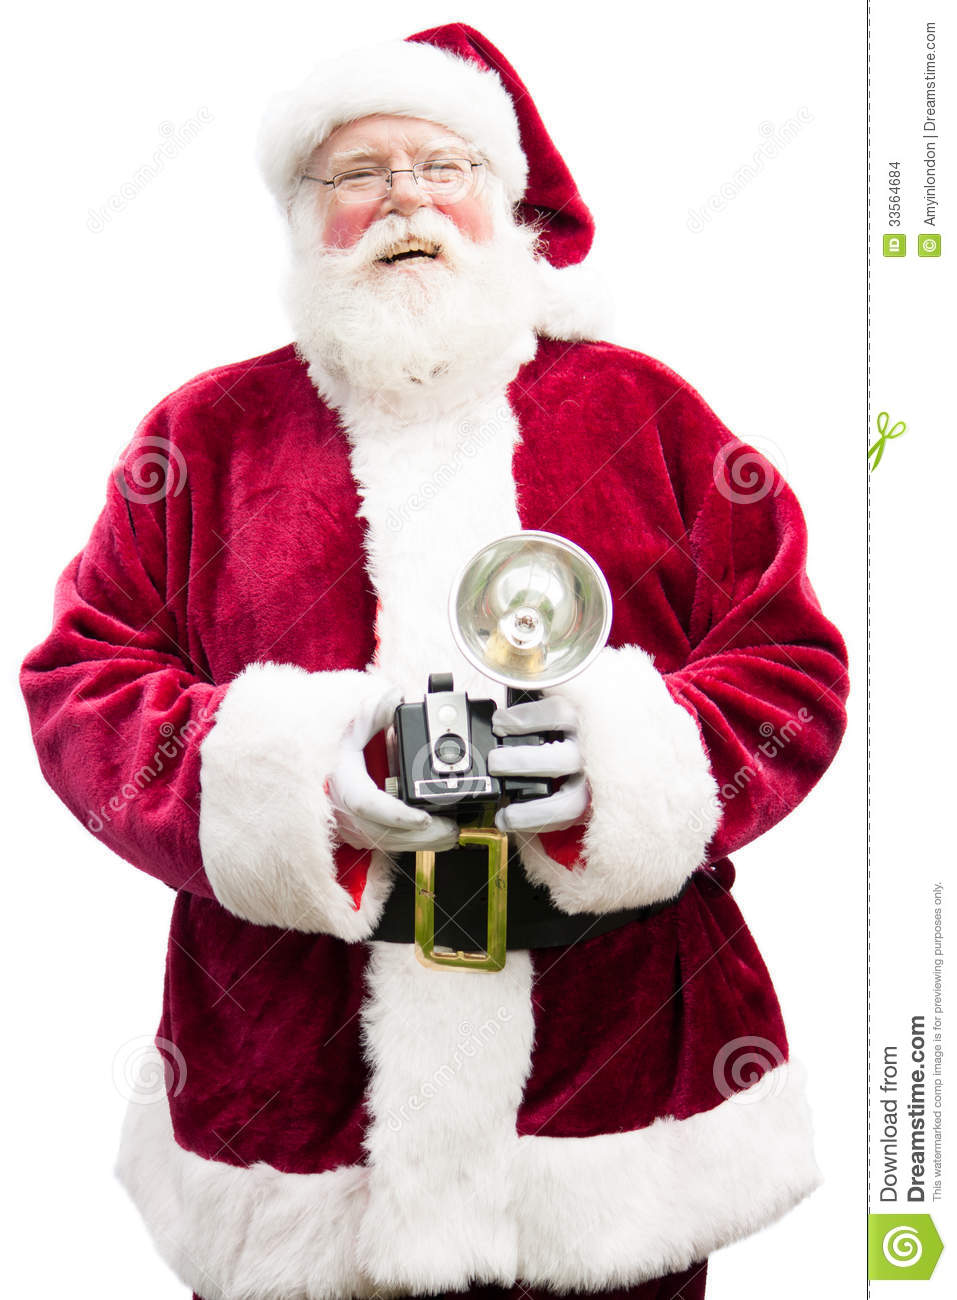 Santa Claus Holding A Vintage Camera Laughs Looking Into The Camera    